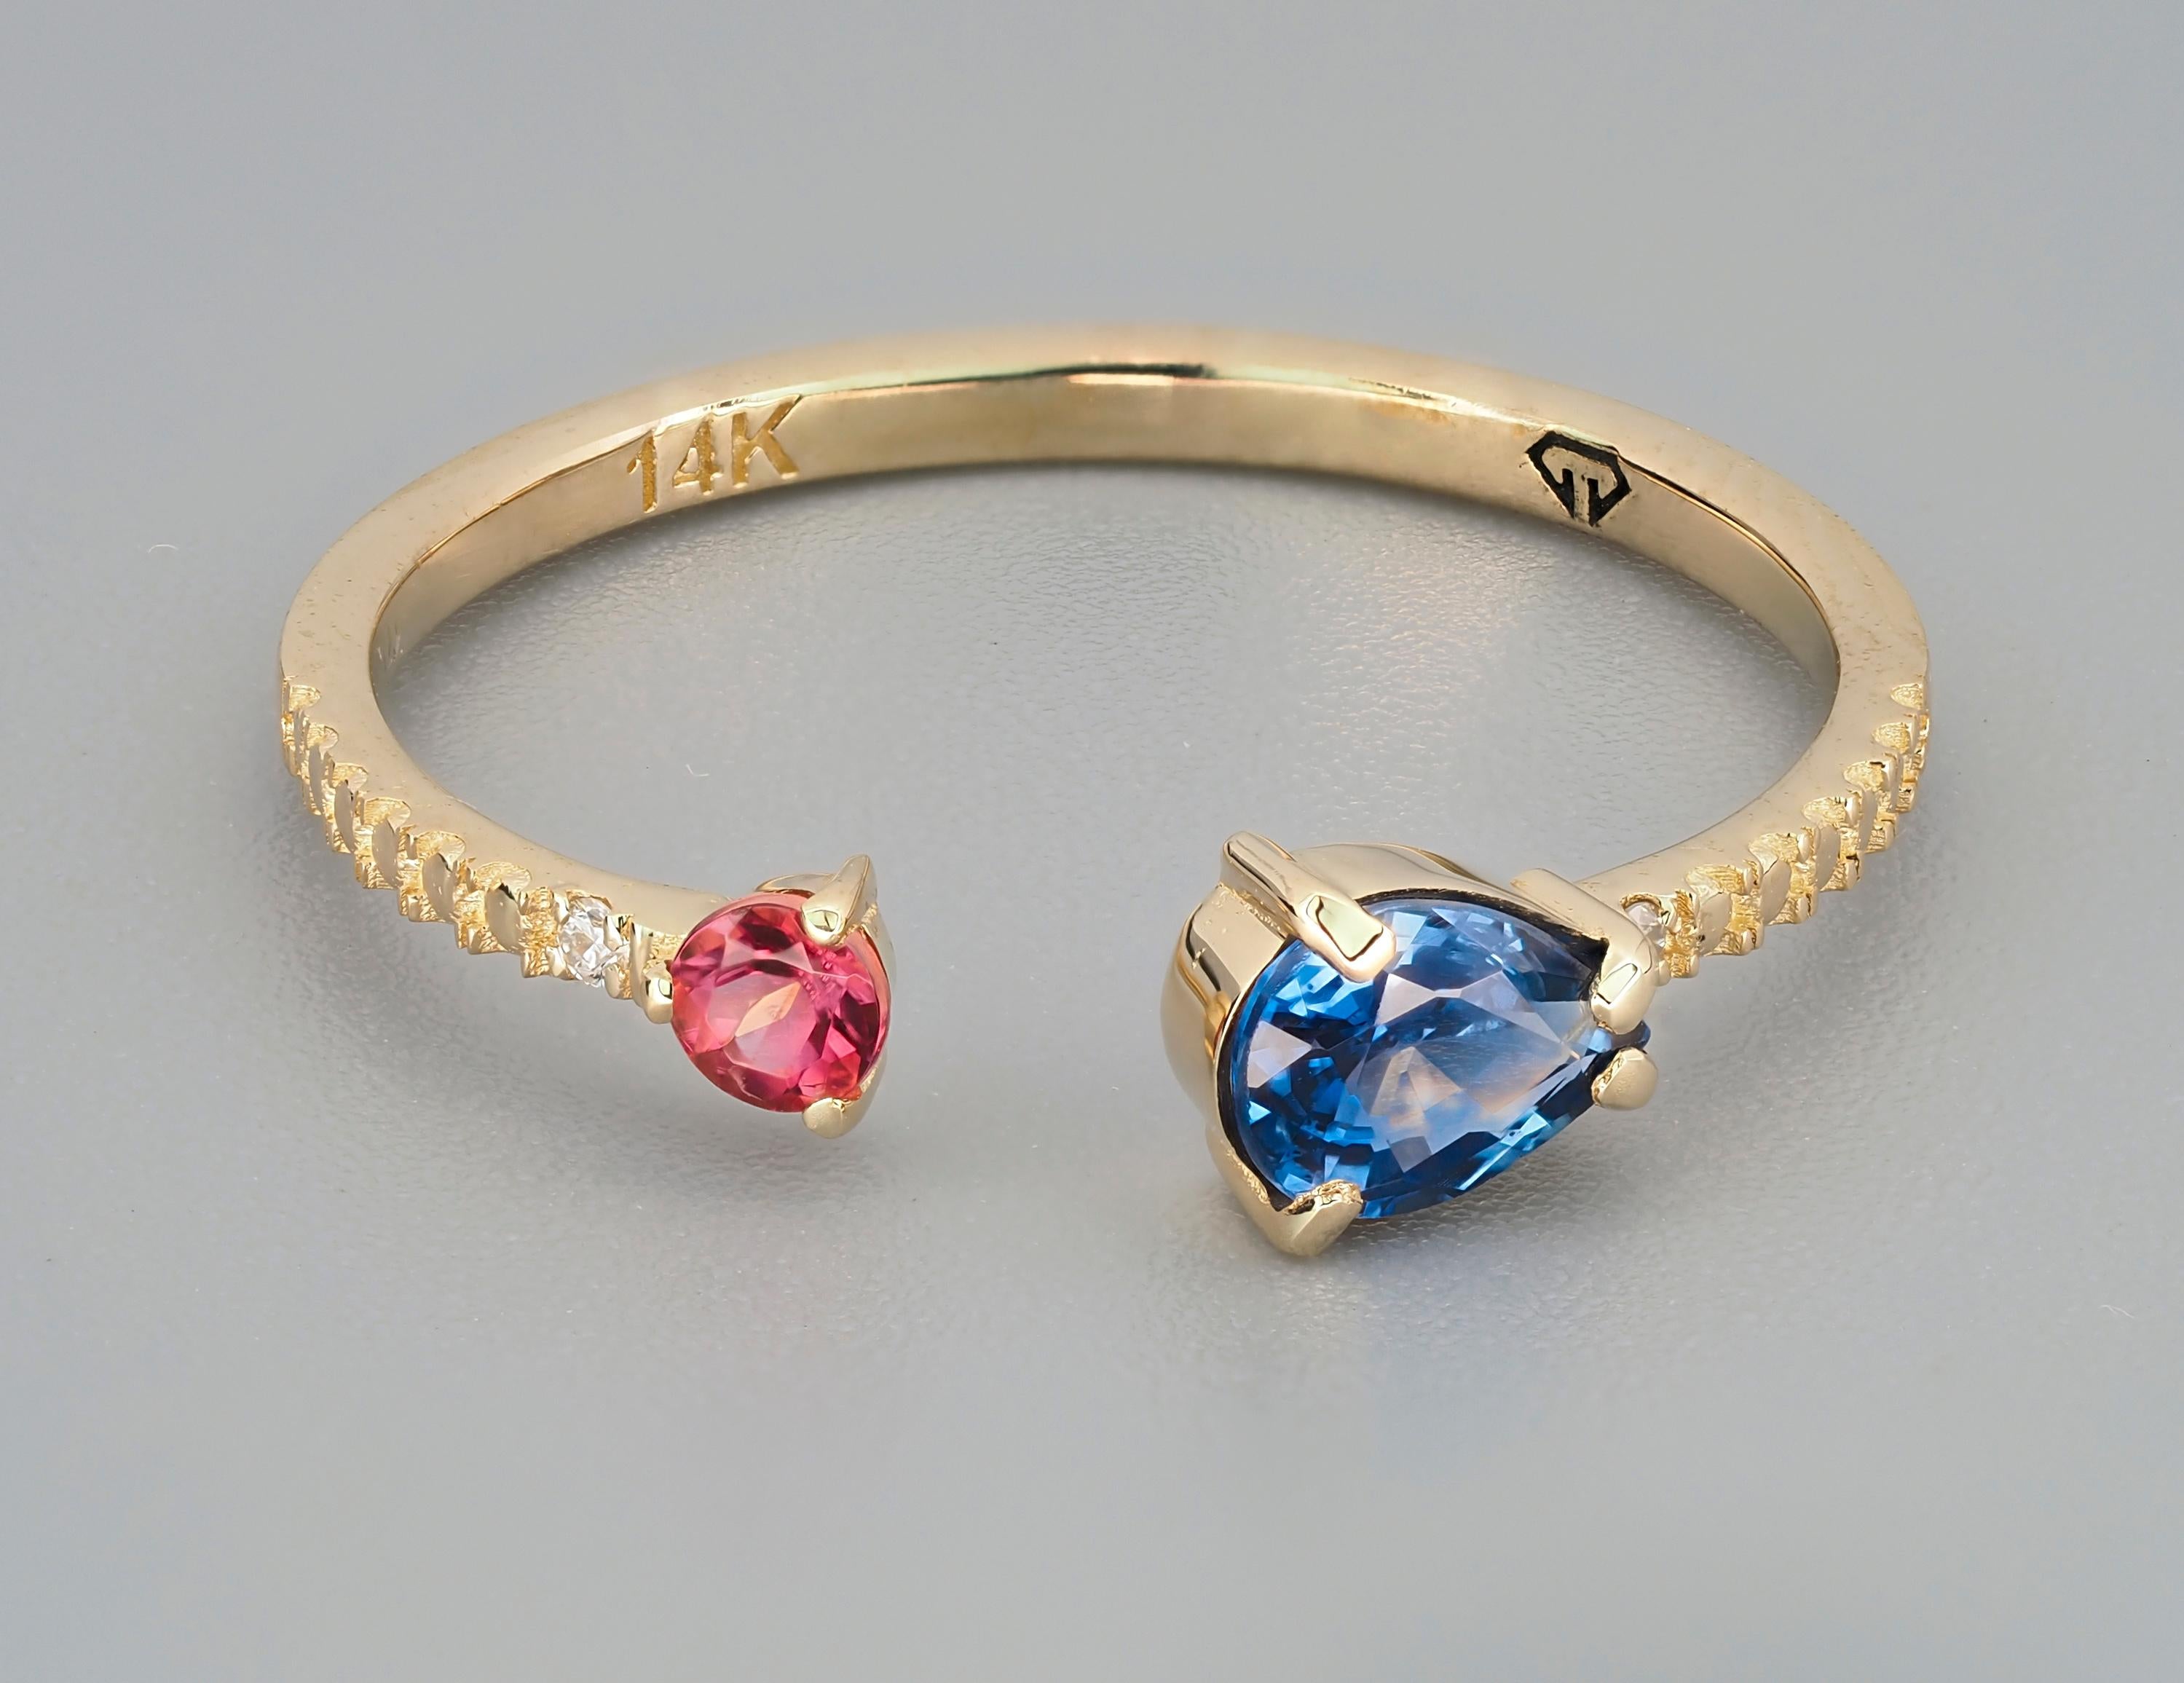 Blue sapphire 14k gold ring. 
Pear sapphire gold ring. Genuine sapphire ring. Opend enged ring with gemstones. Natural sapphire ring.

Weight: 1.3 g. depends from size.
Gold - 14k gold.

Central stone: Sapphire
Cut: pear
Weight: aprx 0.6 ct.
Color: